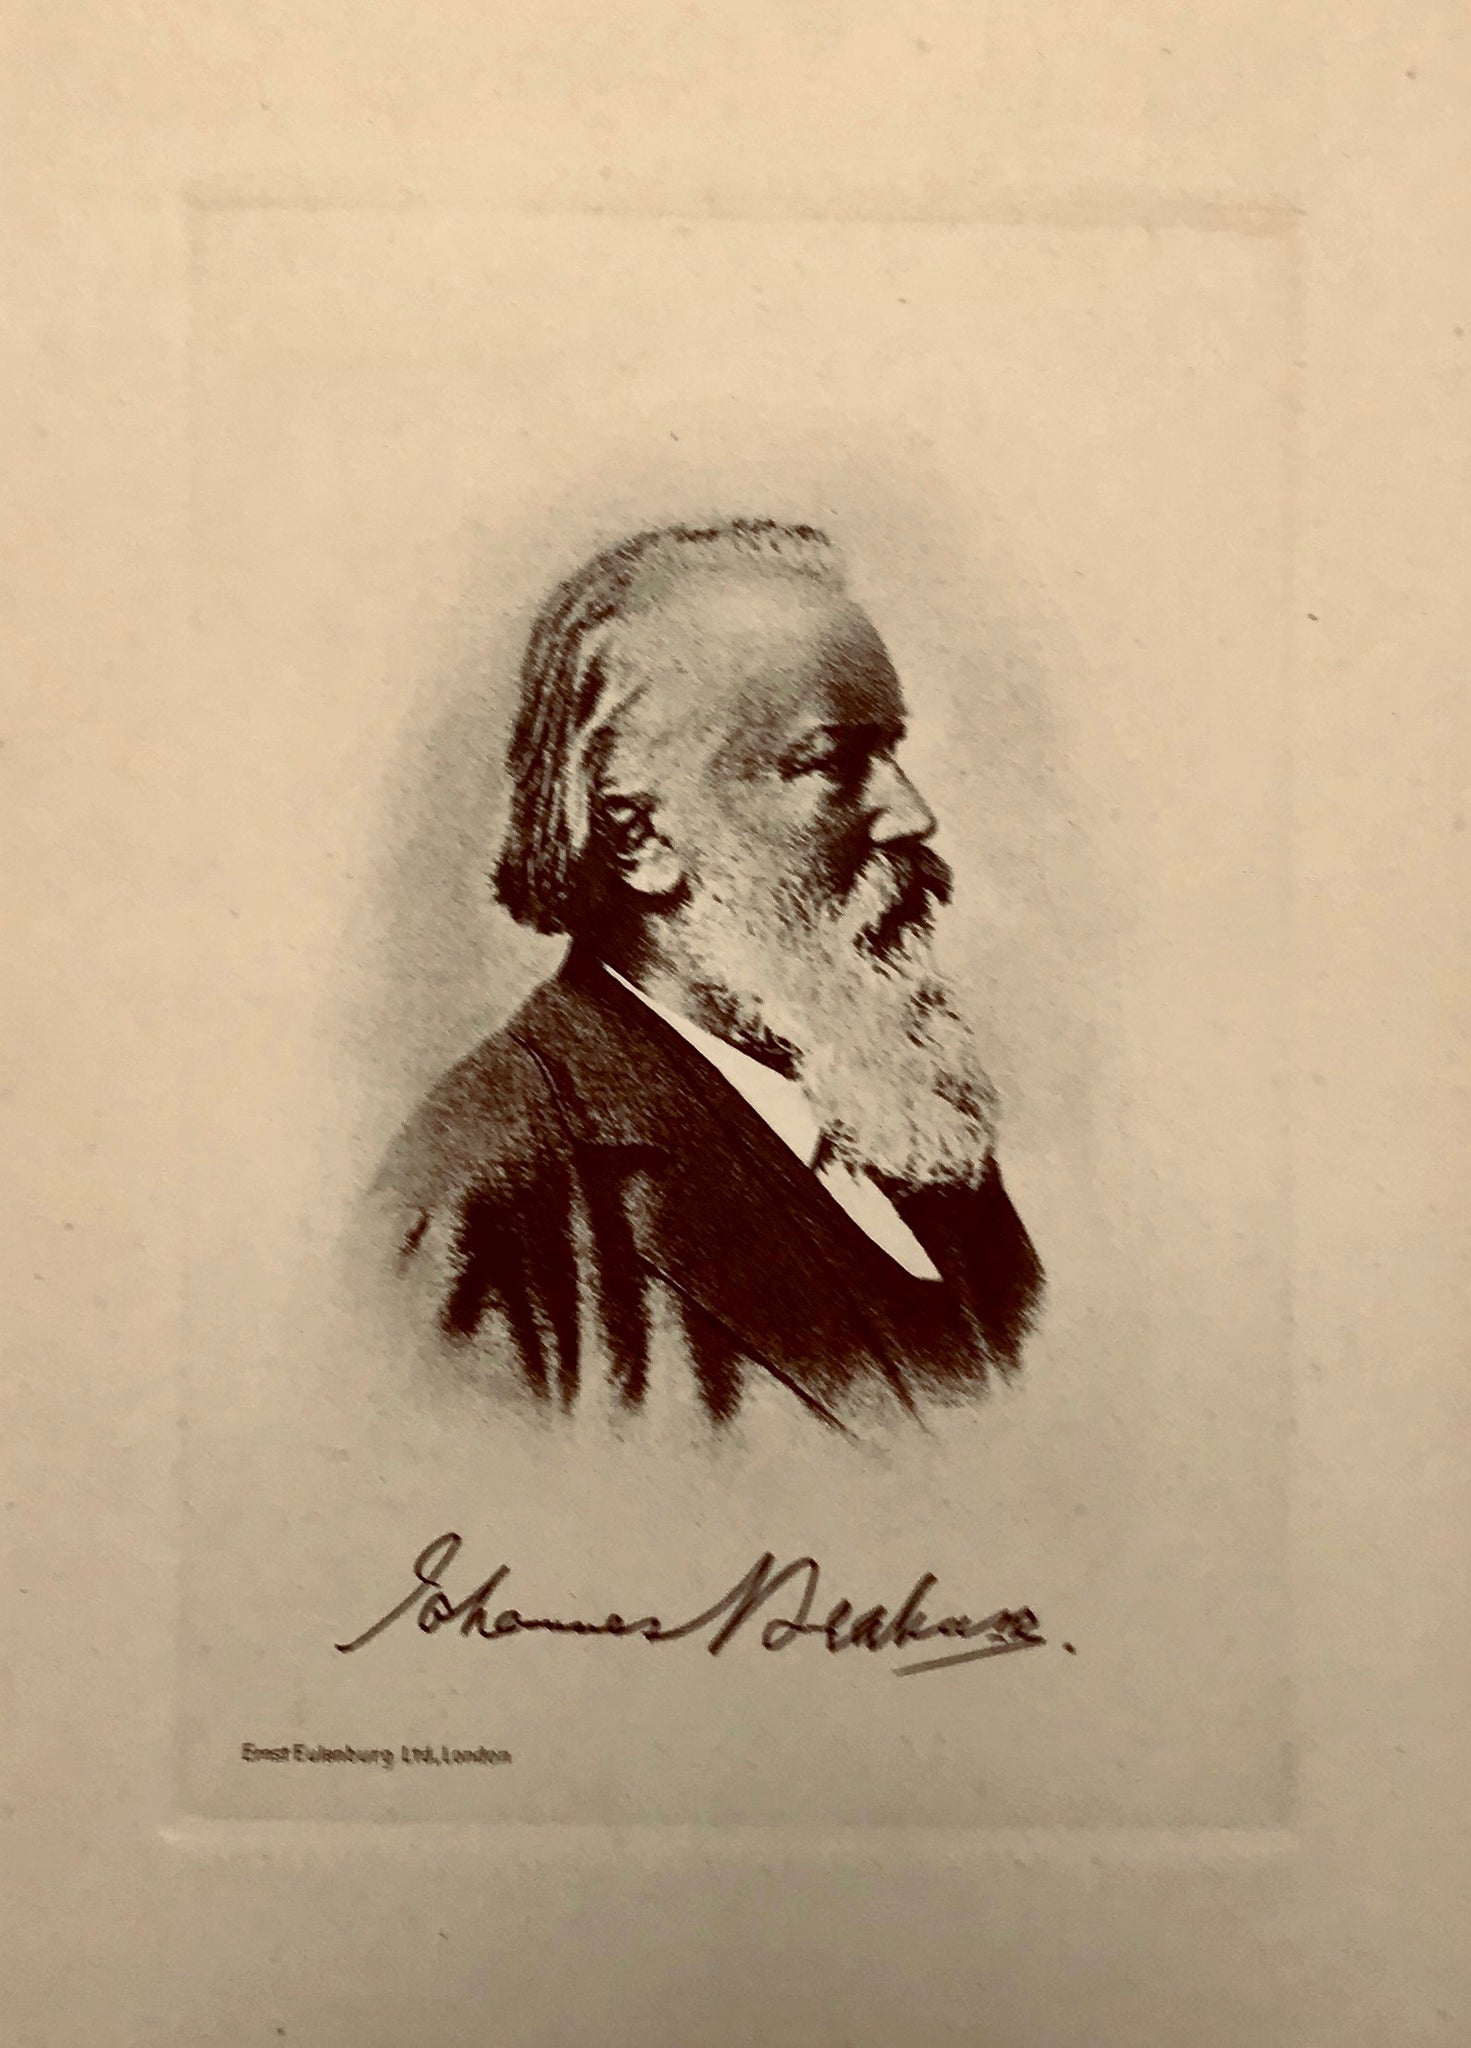 "Johannes Brahms"  Etching published by Erst Eulenburg in London ca 1885.